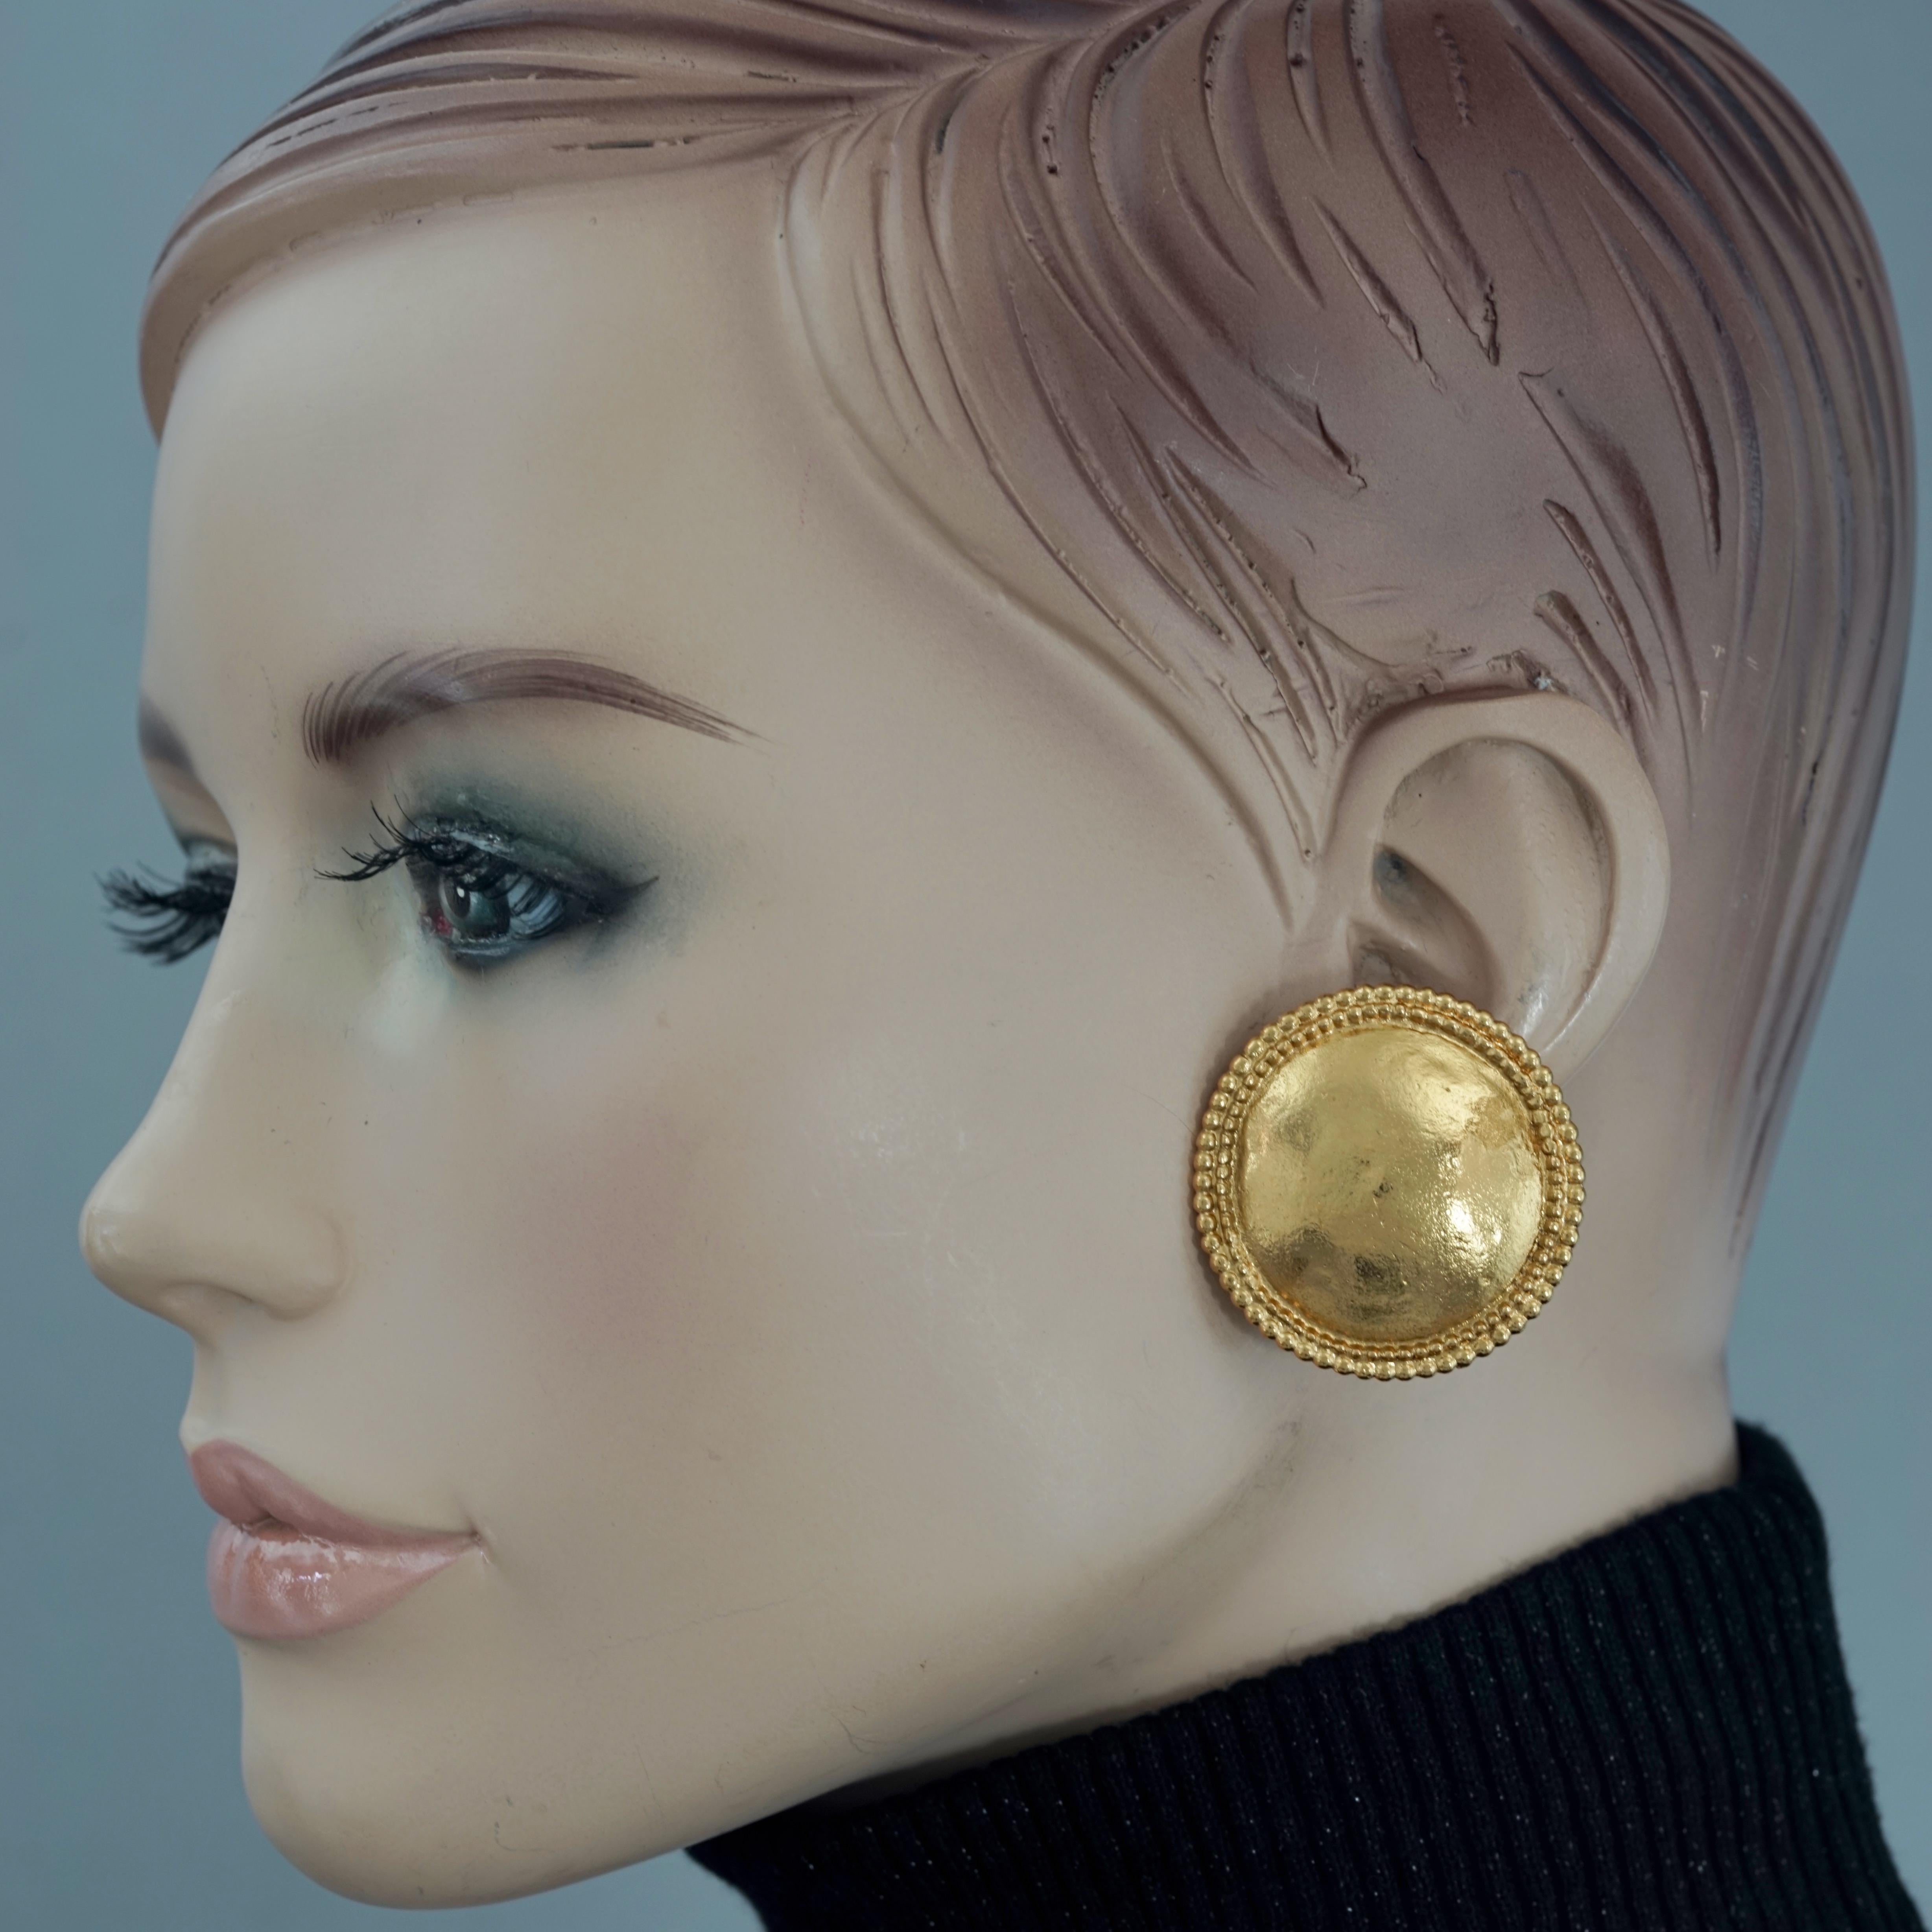 Vintage YVES SAINT LAURENT Ysl Round Ball Trim Disc Earrings

Measurements:
Height: 1.45 inches (3.7 cm)
Width: 1.45 inches (3.7 cm)
Weight: 16 grams

Features:
- 100% Authentic YVES SAINT LAURENT.
- Textured disc earrings with bubble trimming